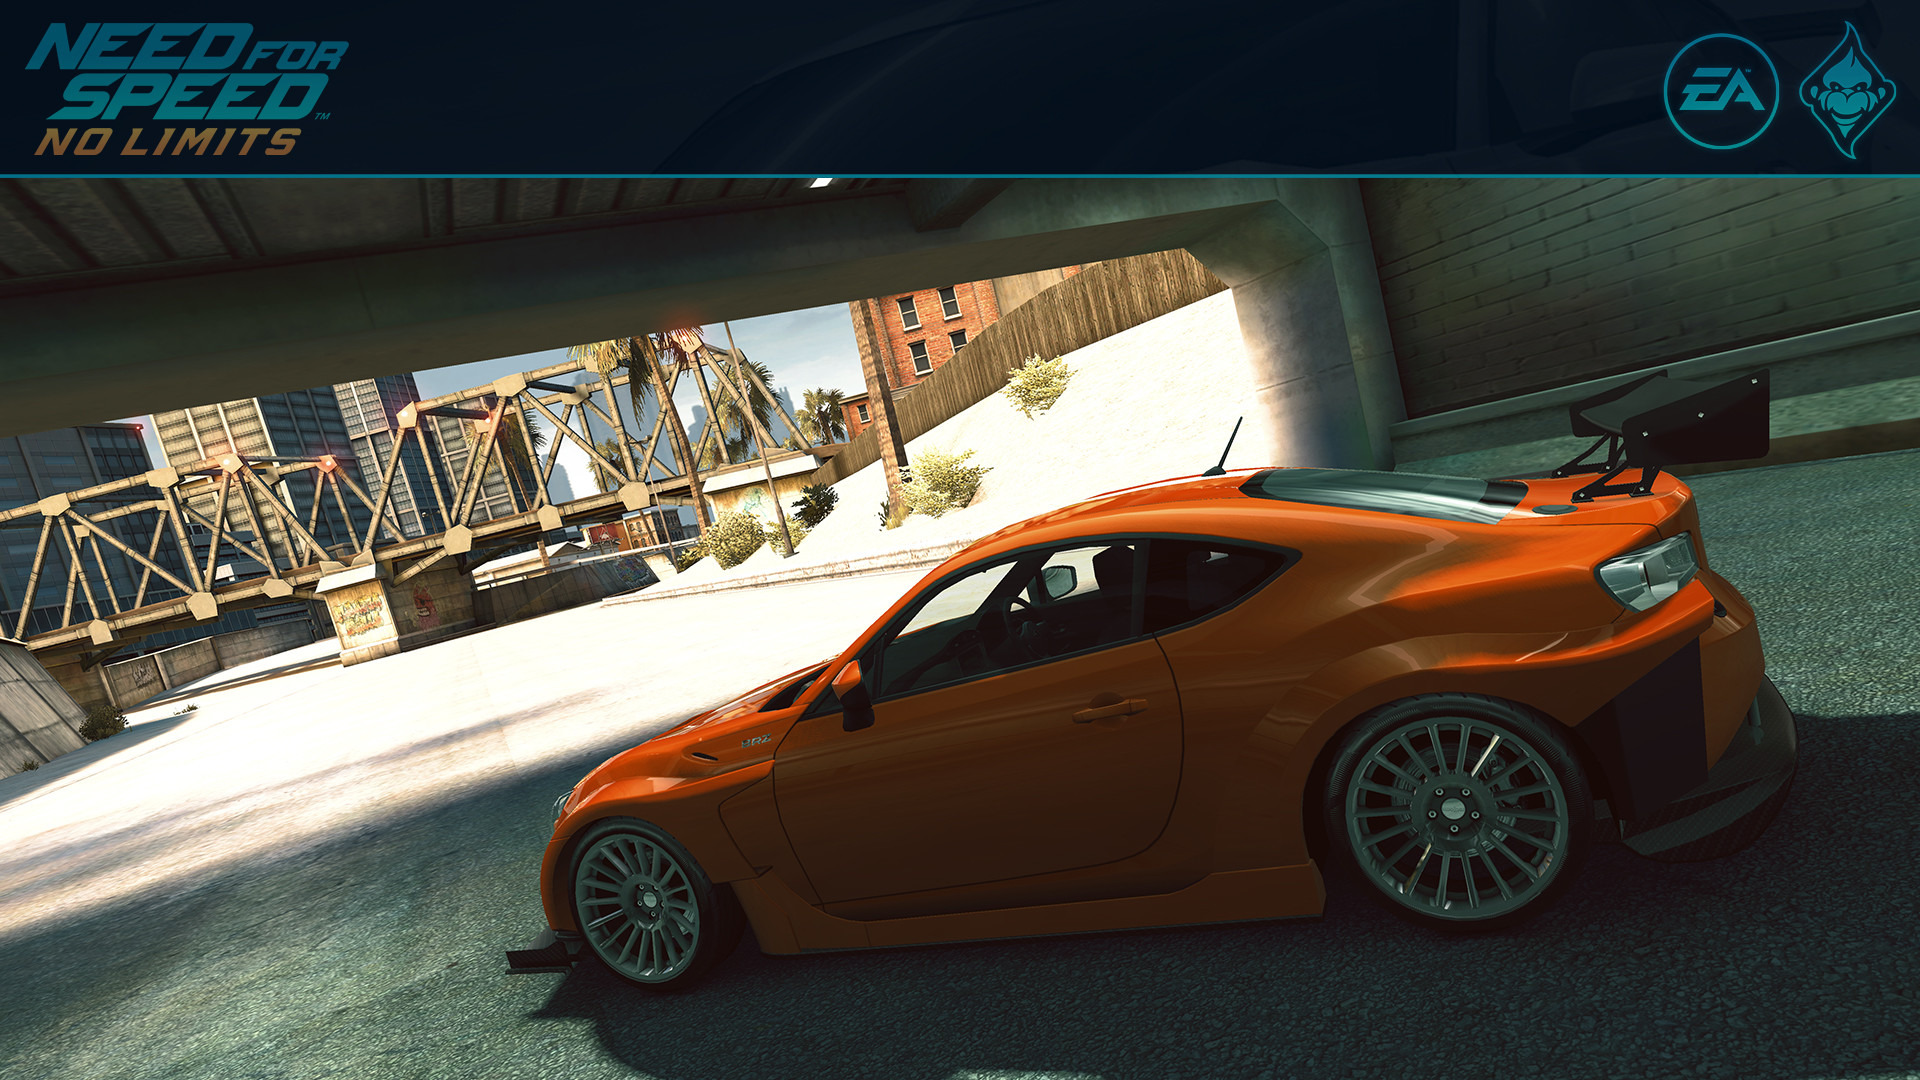 Need for Speed: No Limits, Video games, Car, Vehicle, Tuning, Subaru BRZ, Need for Speed Wallpaper